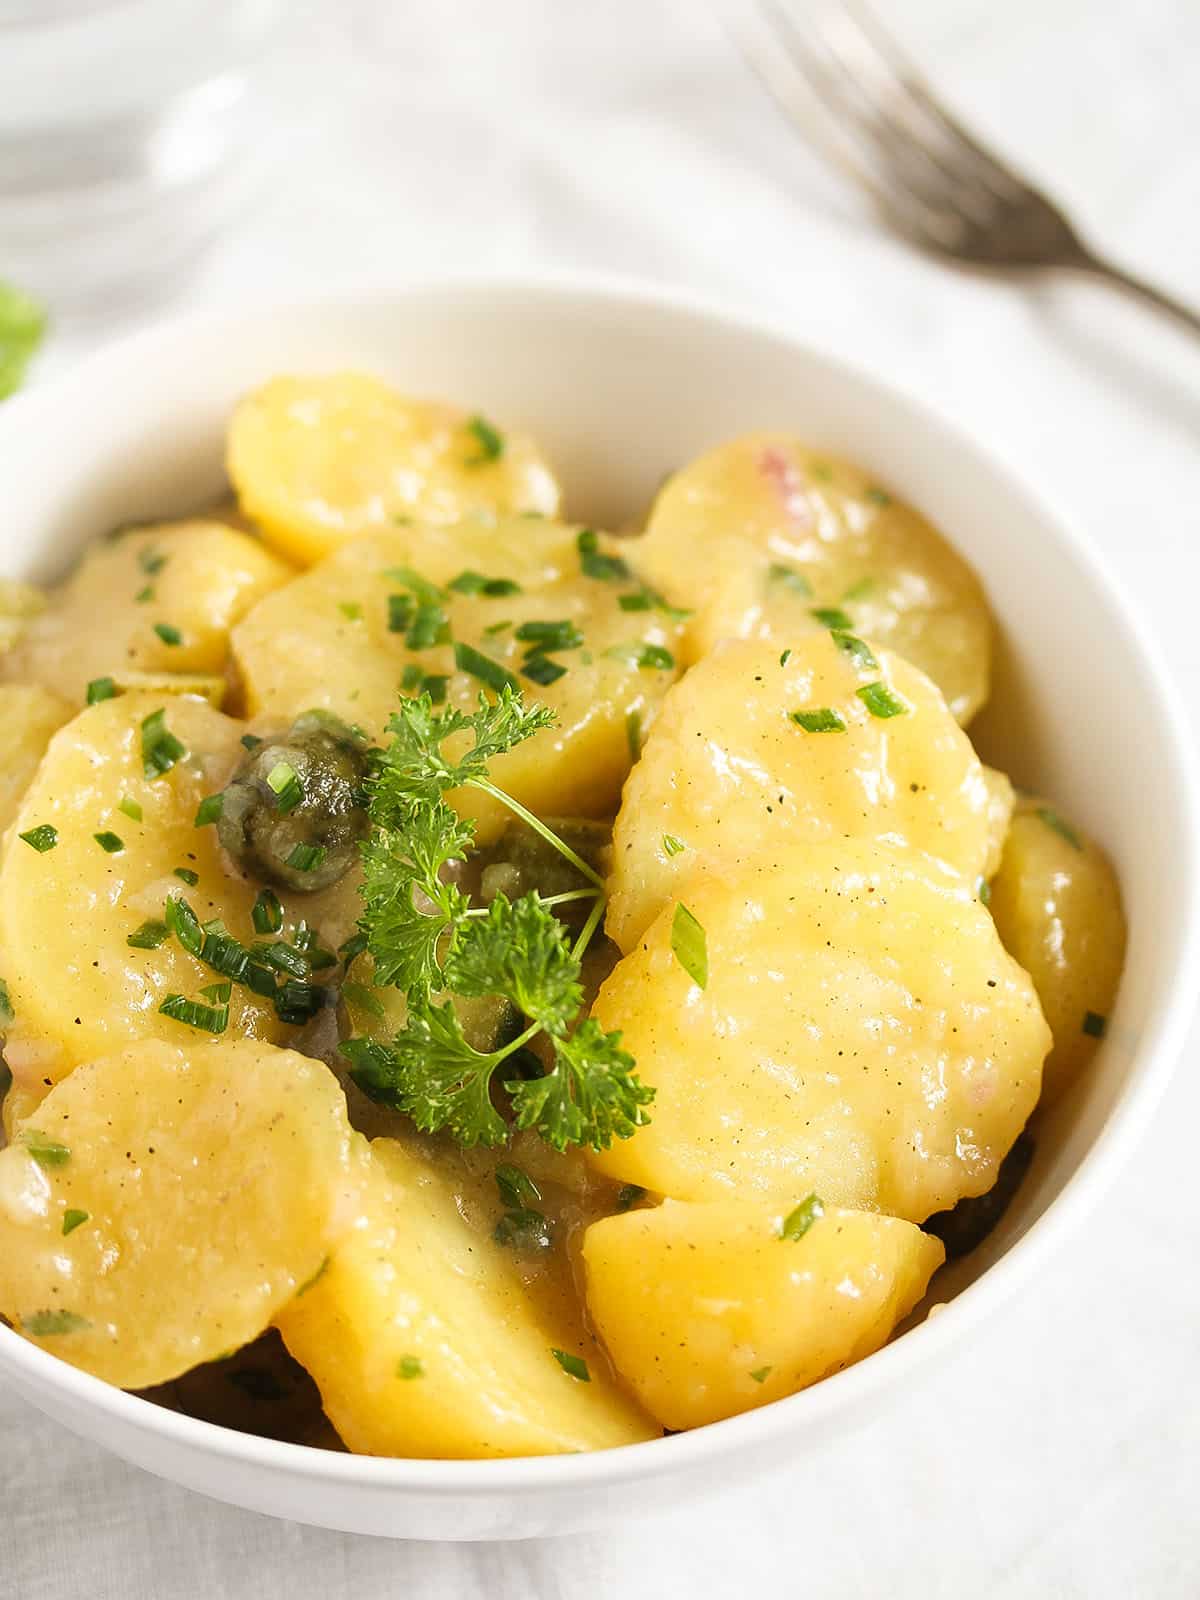 german potato salad sprinkled with chives in a white bowl.